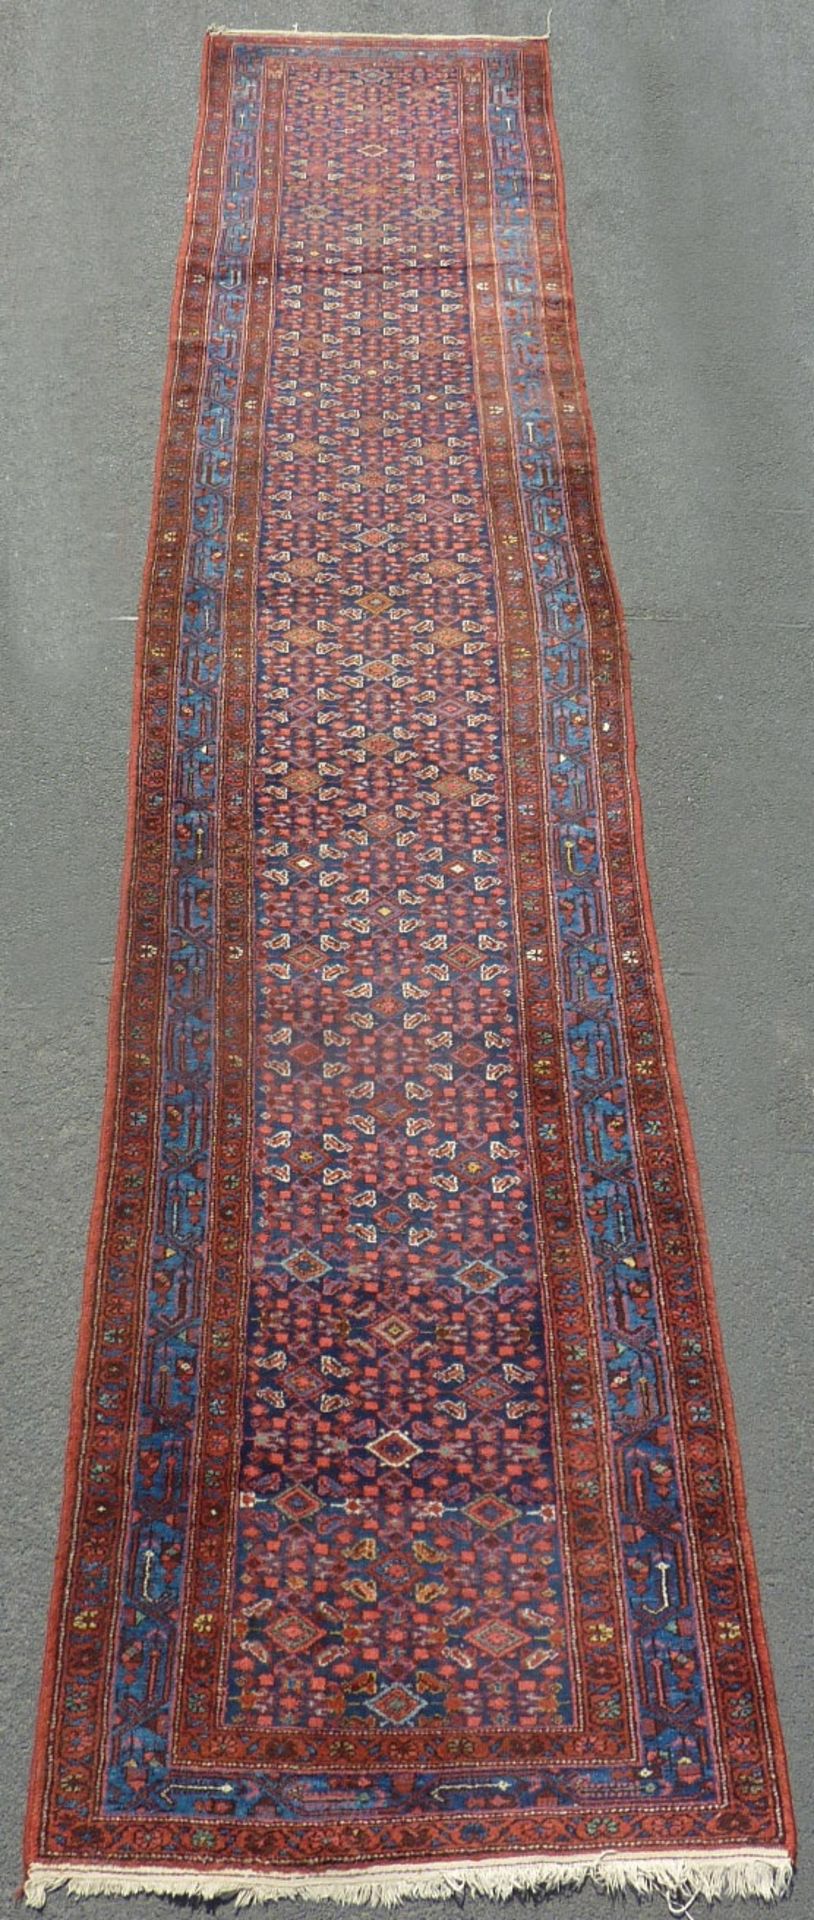 Hamadan Persian rug. Runner. Iran. Old, around 1930.499 cm x 105 cm. Knotted by hand. Wool on